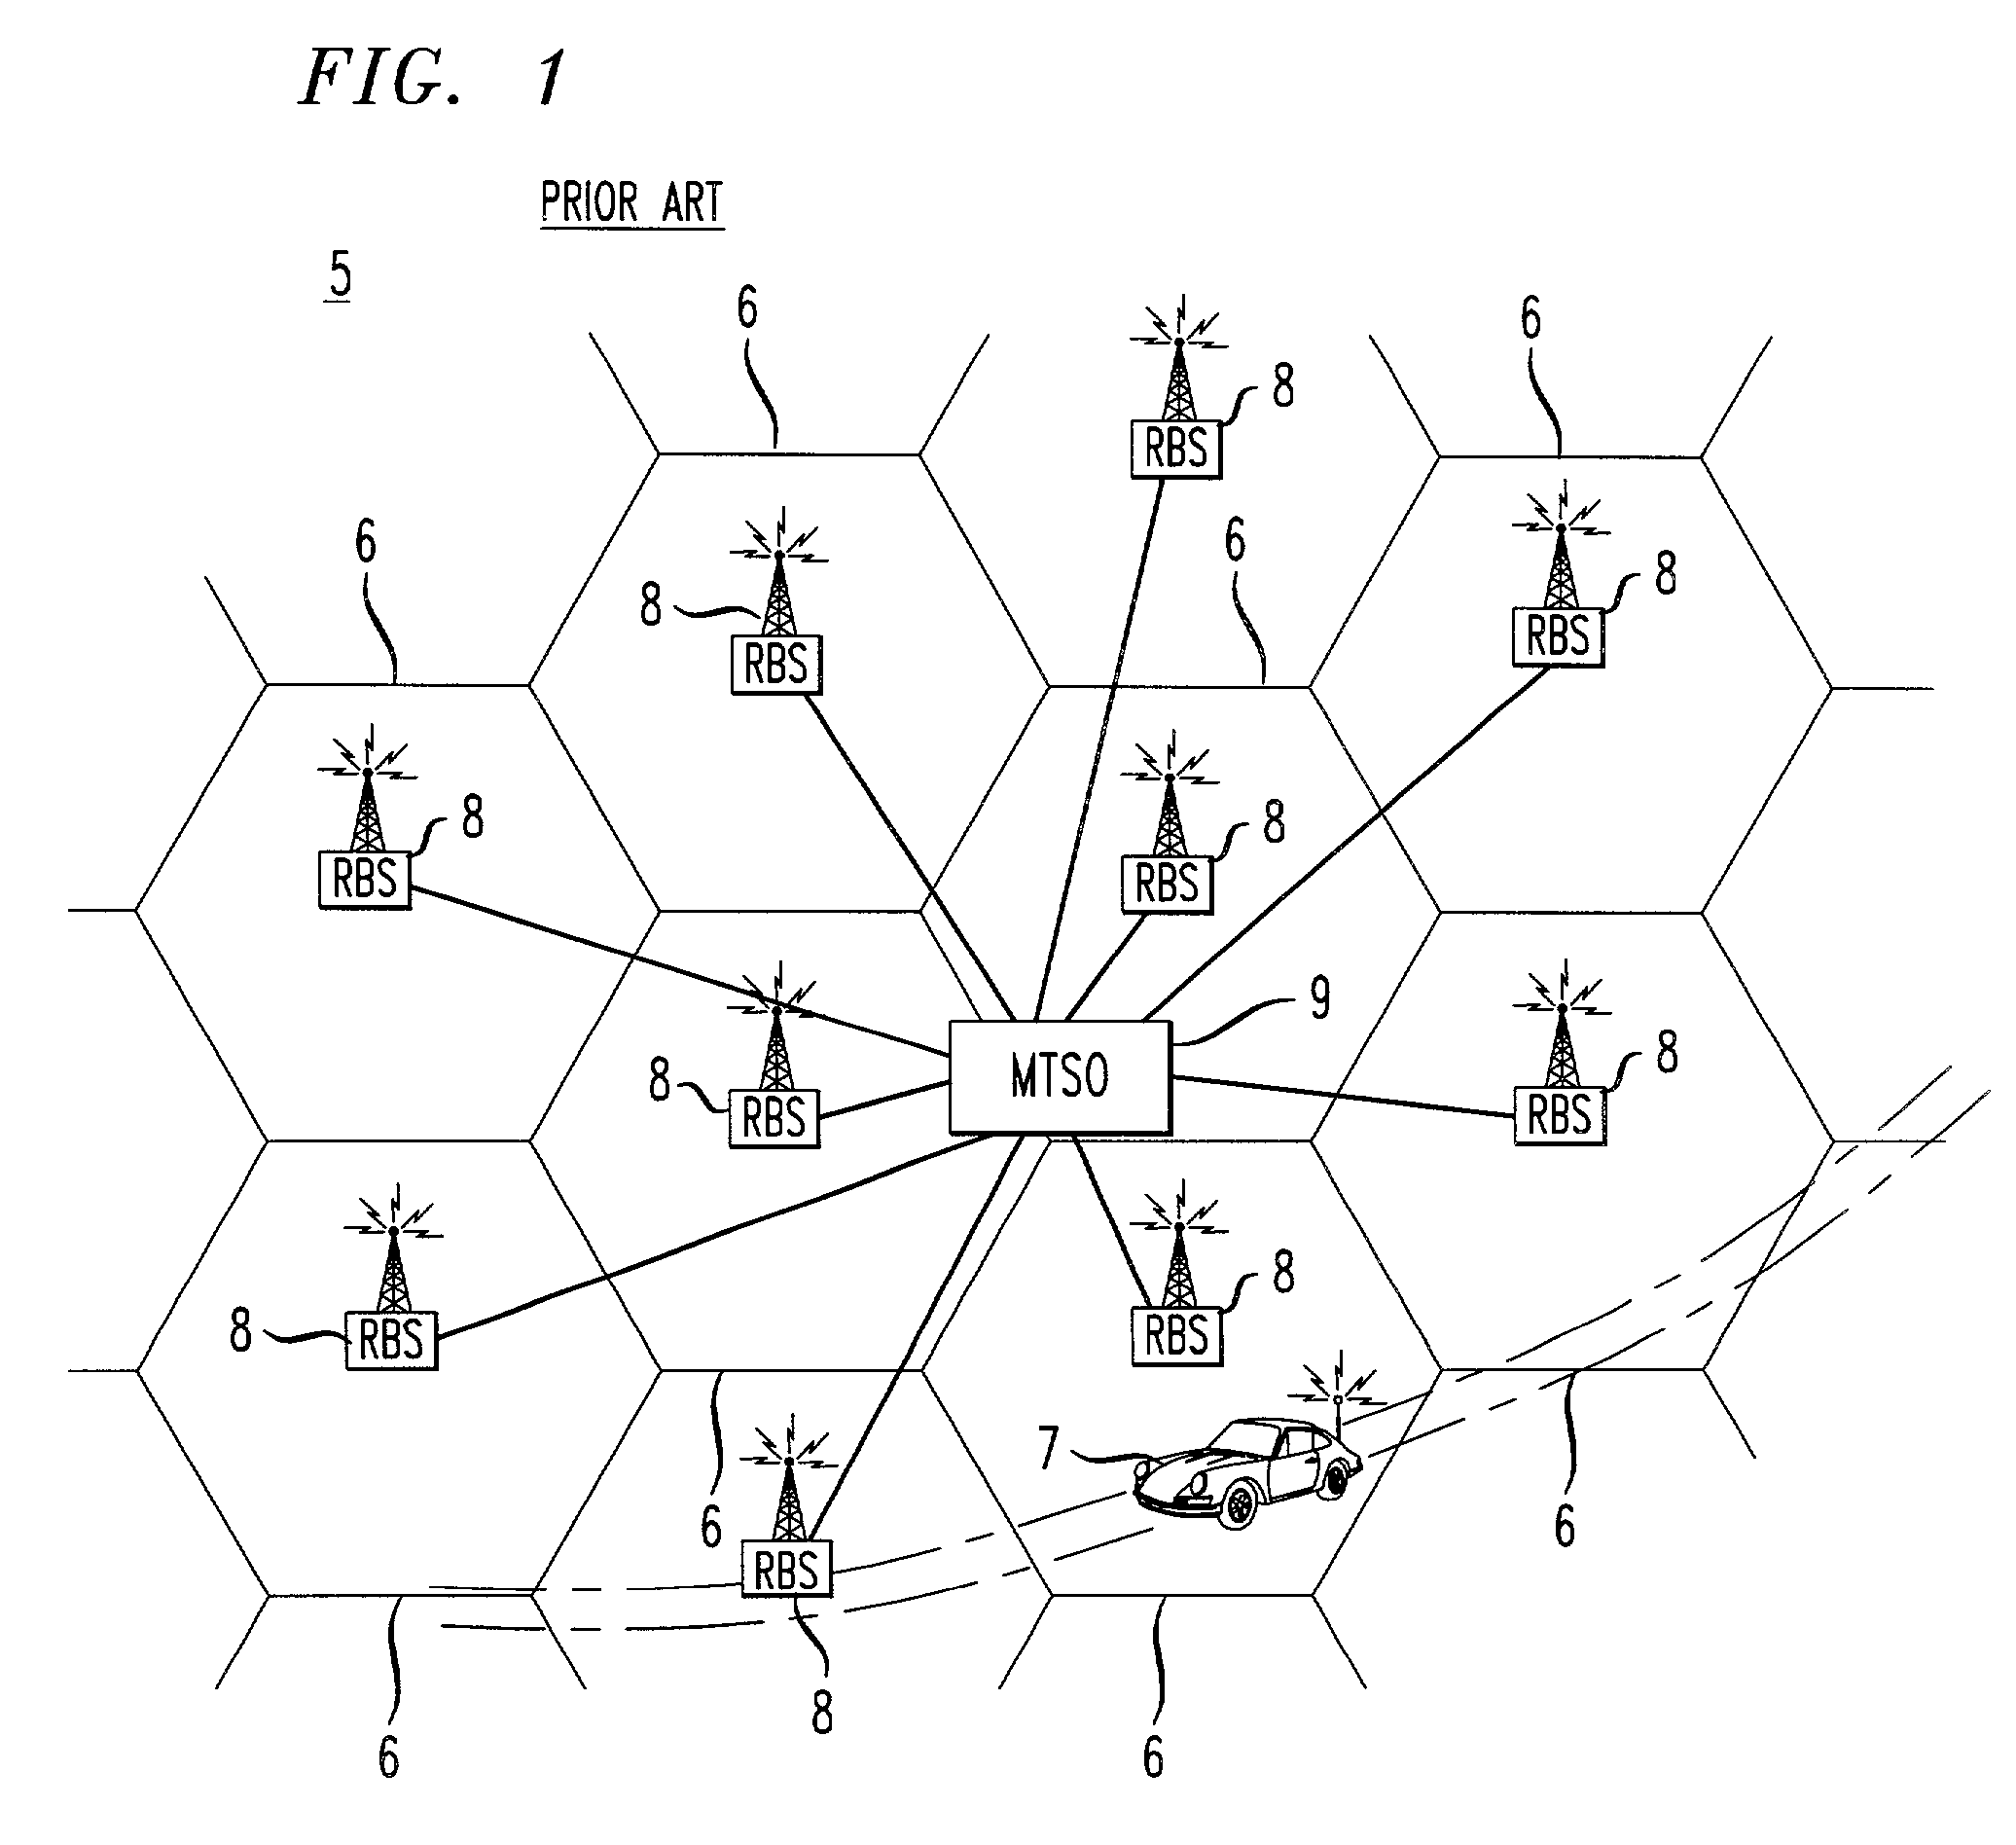 Monitoring network performance using individual cell phone location and performance information